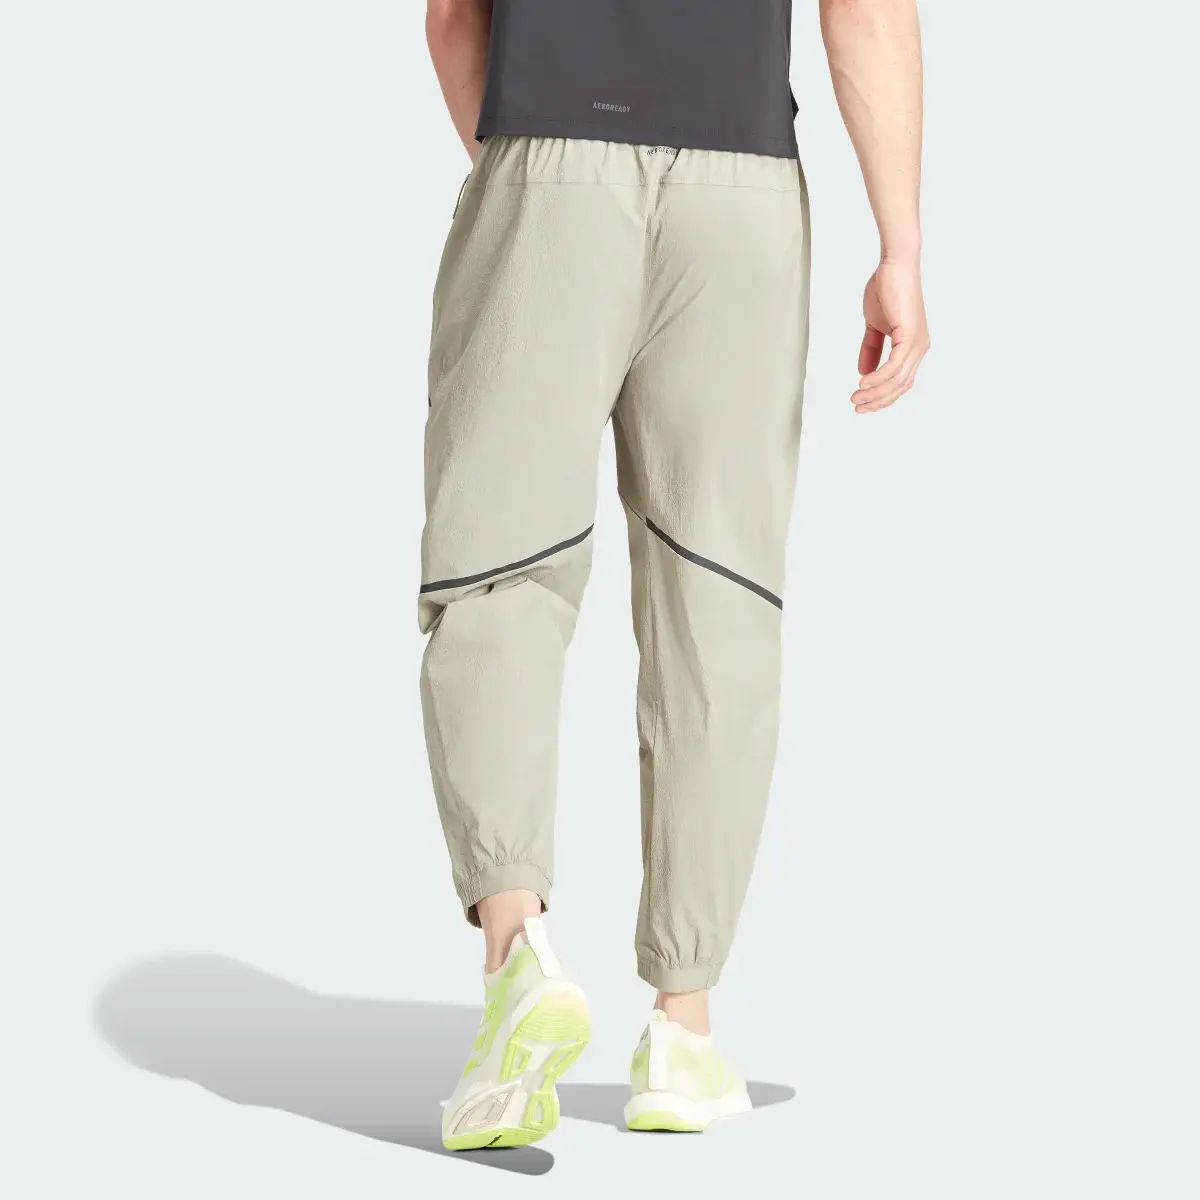 Adidas Designed for Training Workout Pants. 3